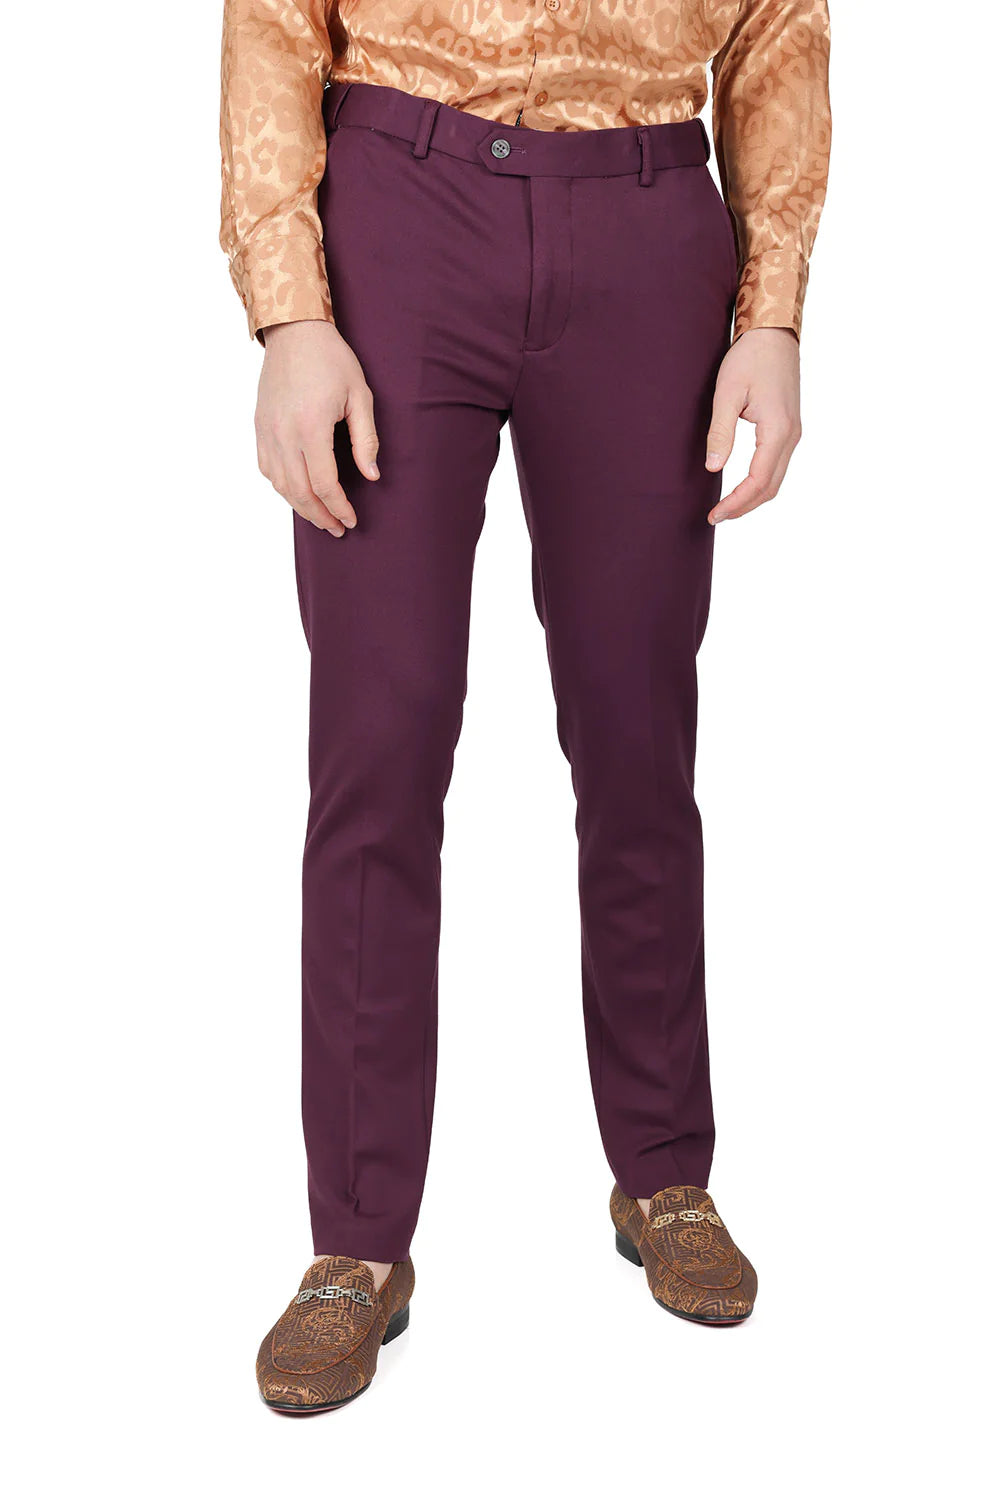 Men's Solid Color Basic Essential Chino Dress Pants